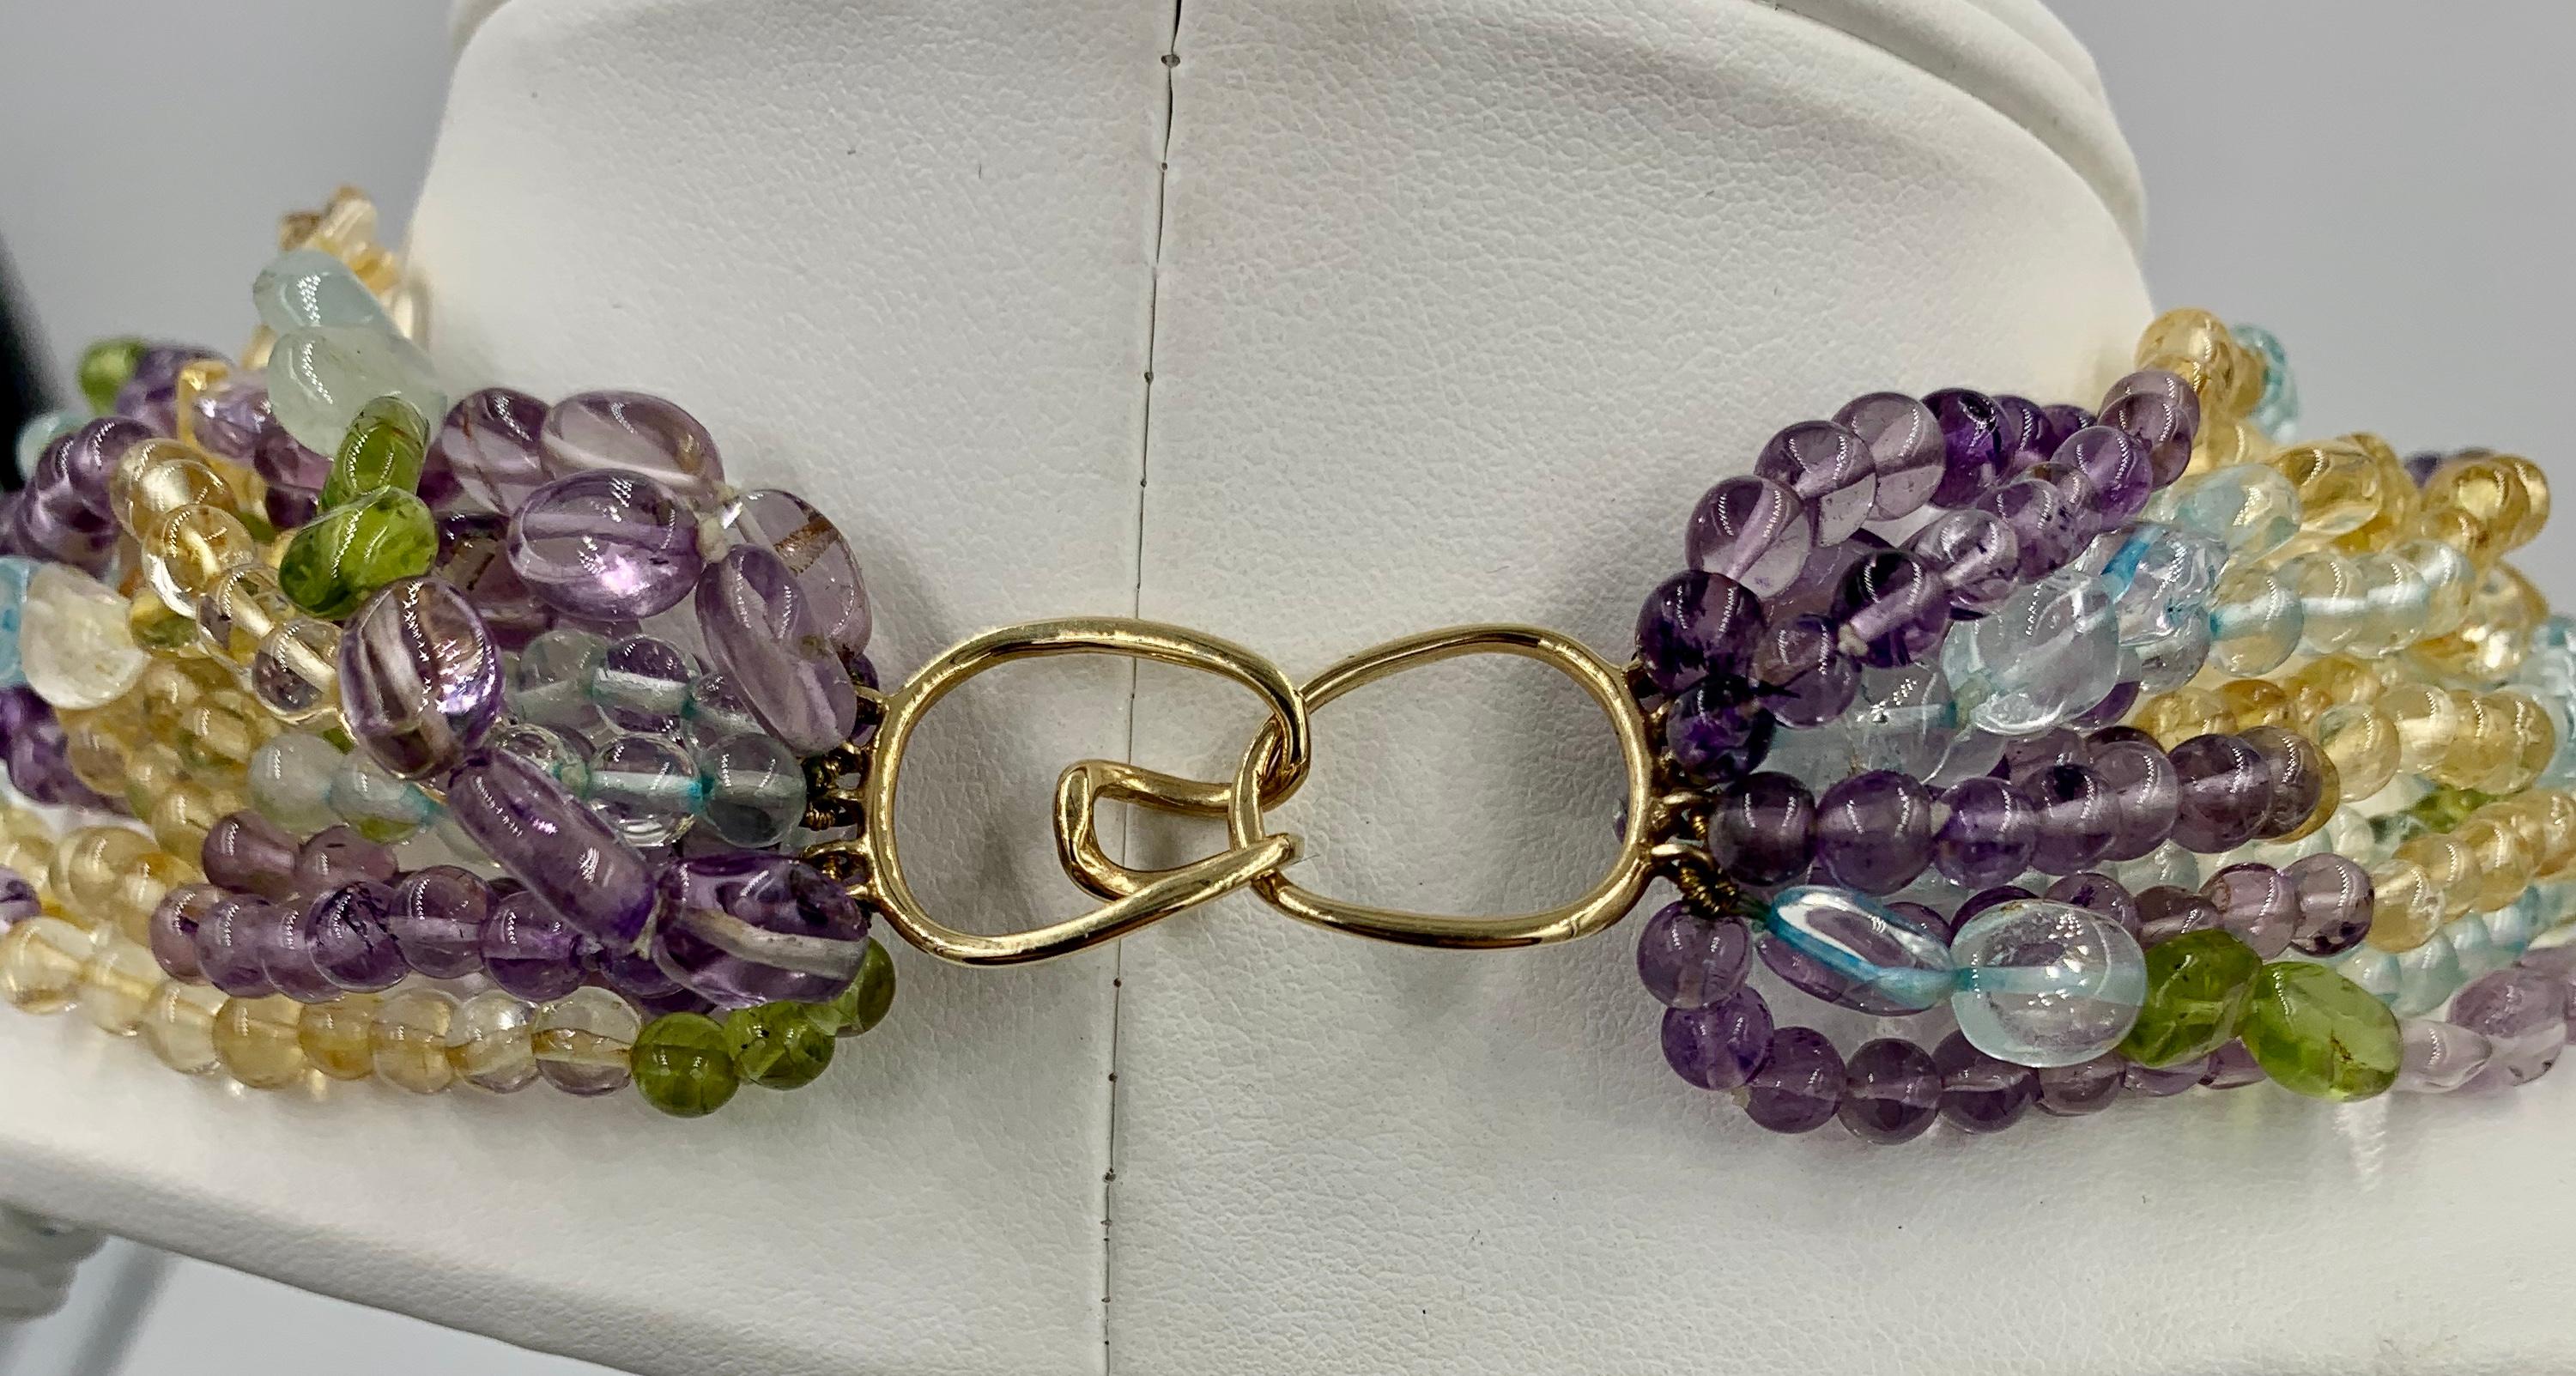 Aquamarine Peridot Citrine Amethyst Torsade Necklace 14 Karat Gold 11 Strand In Excellent Condition For Sale In New York, NY